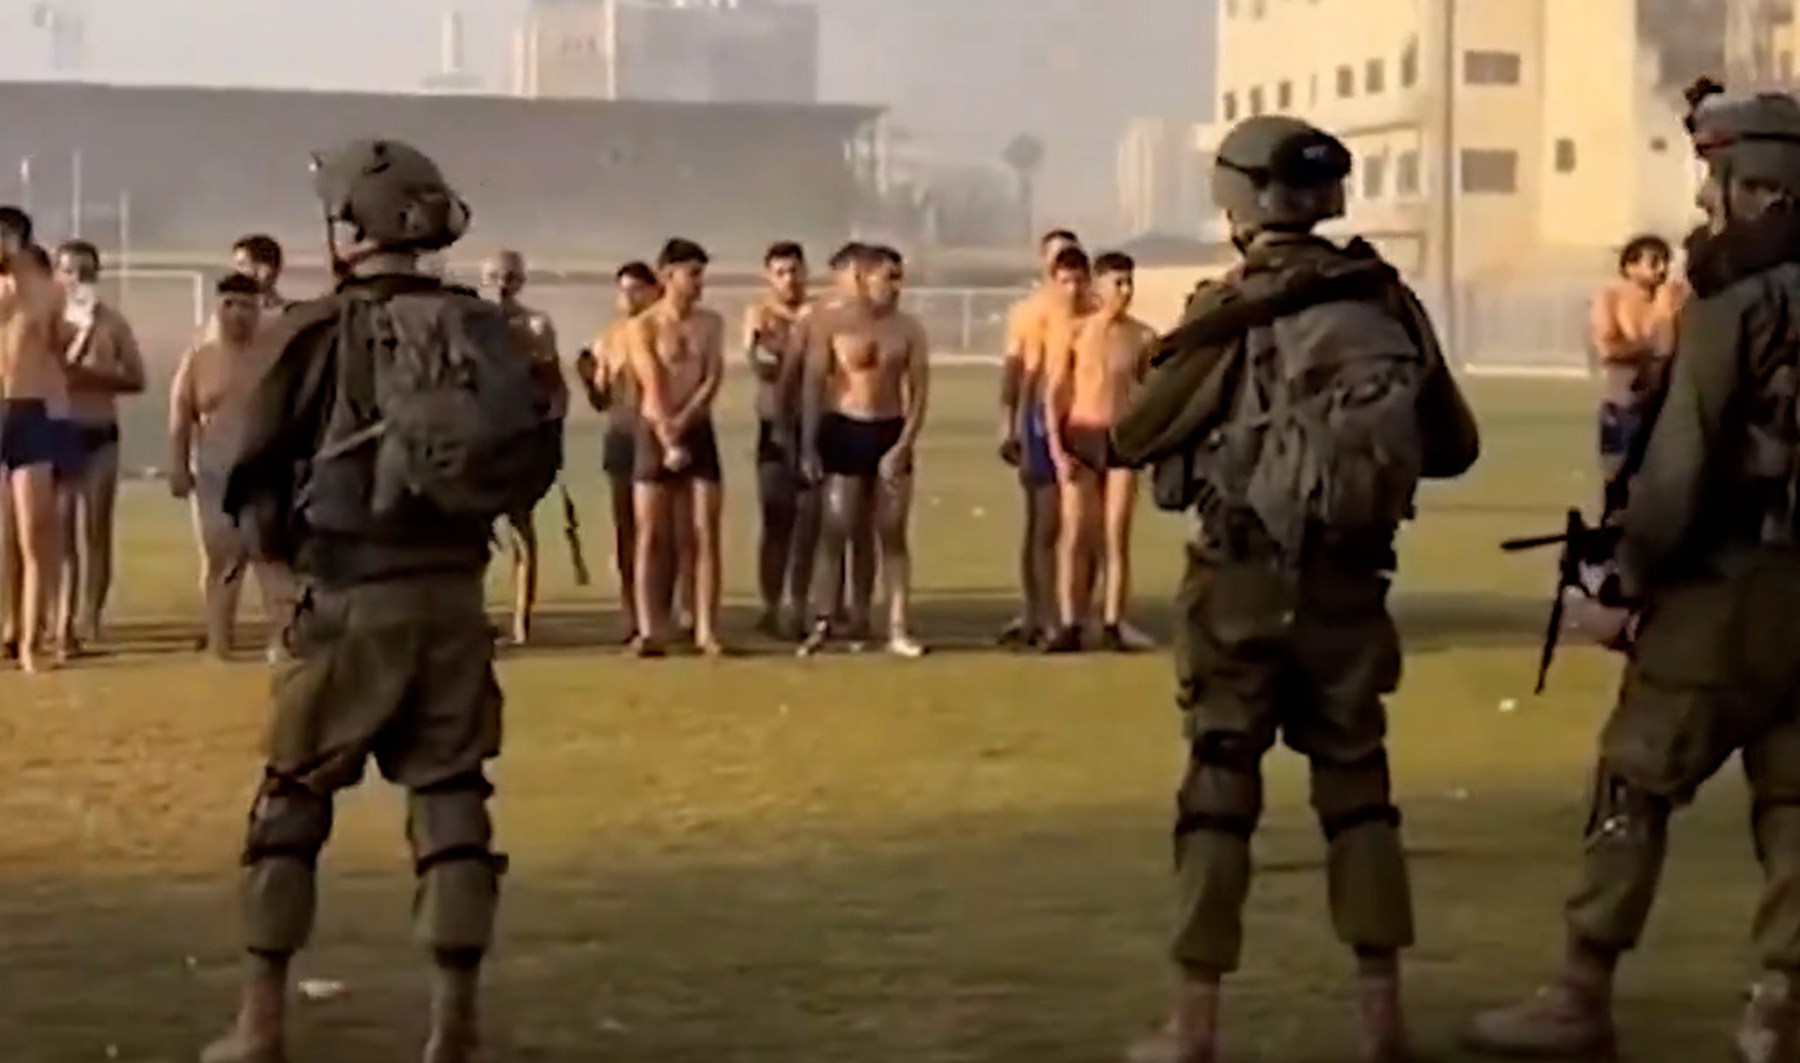 New video shows detainees stripped in Gaza | Israel-Palestine conflict